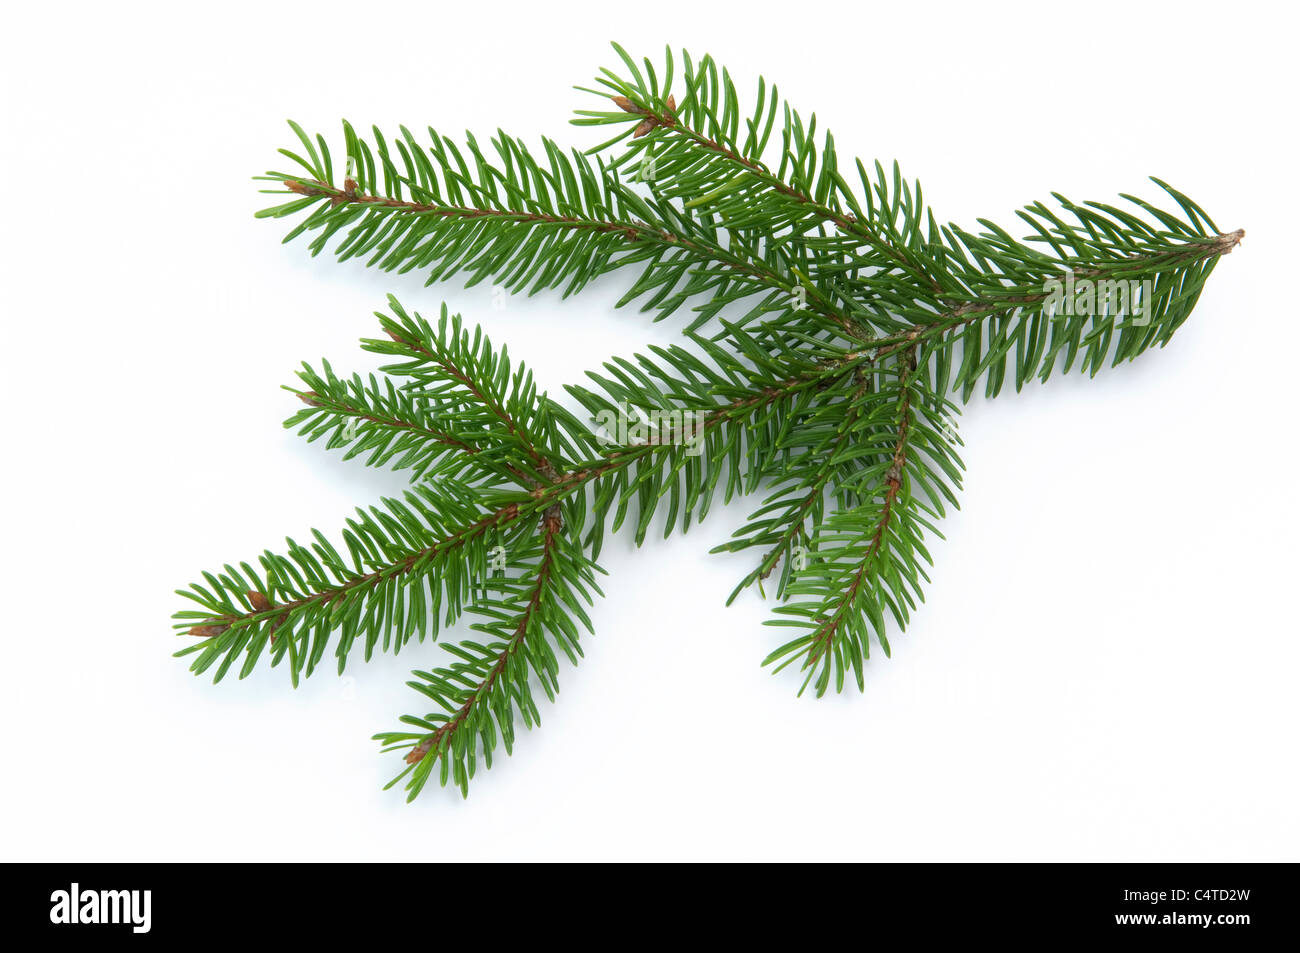 Common Spruce, Norway Spruce (Picea abies), twig. Studio picture against a white background. Stock Photo